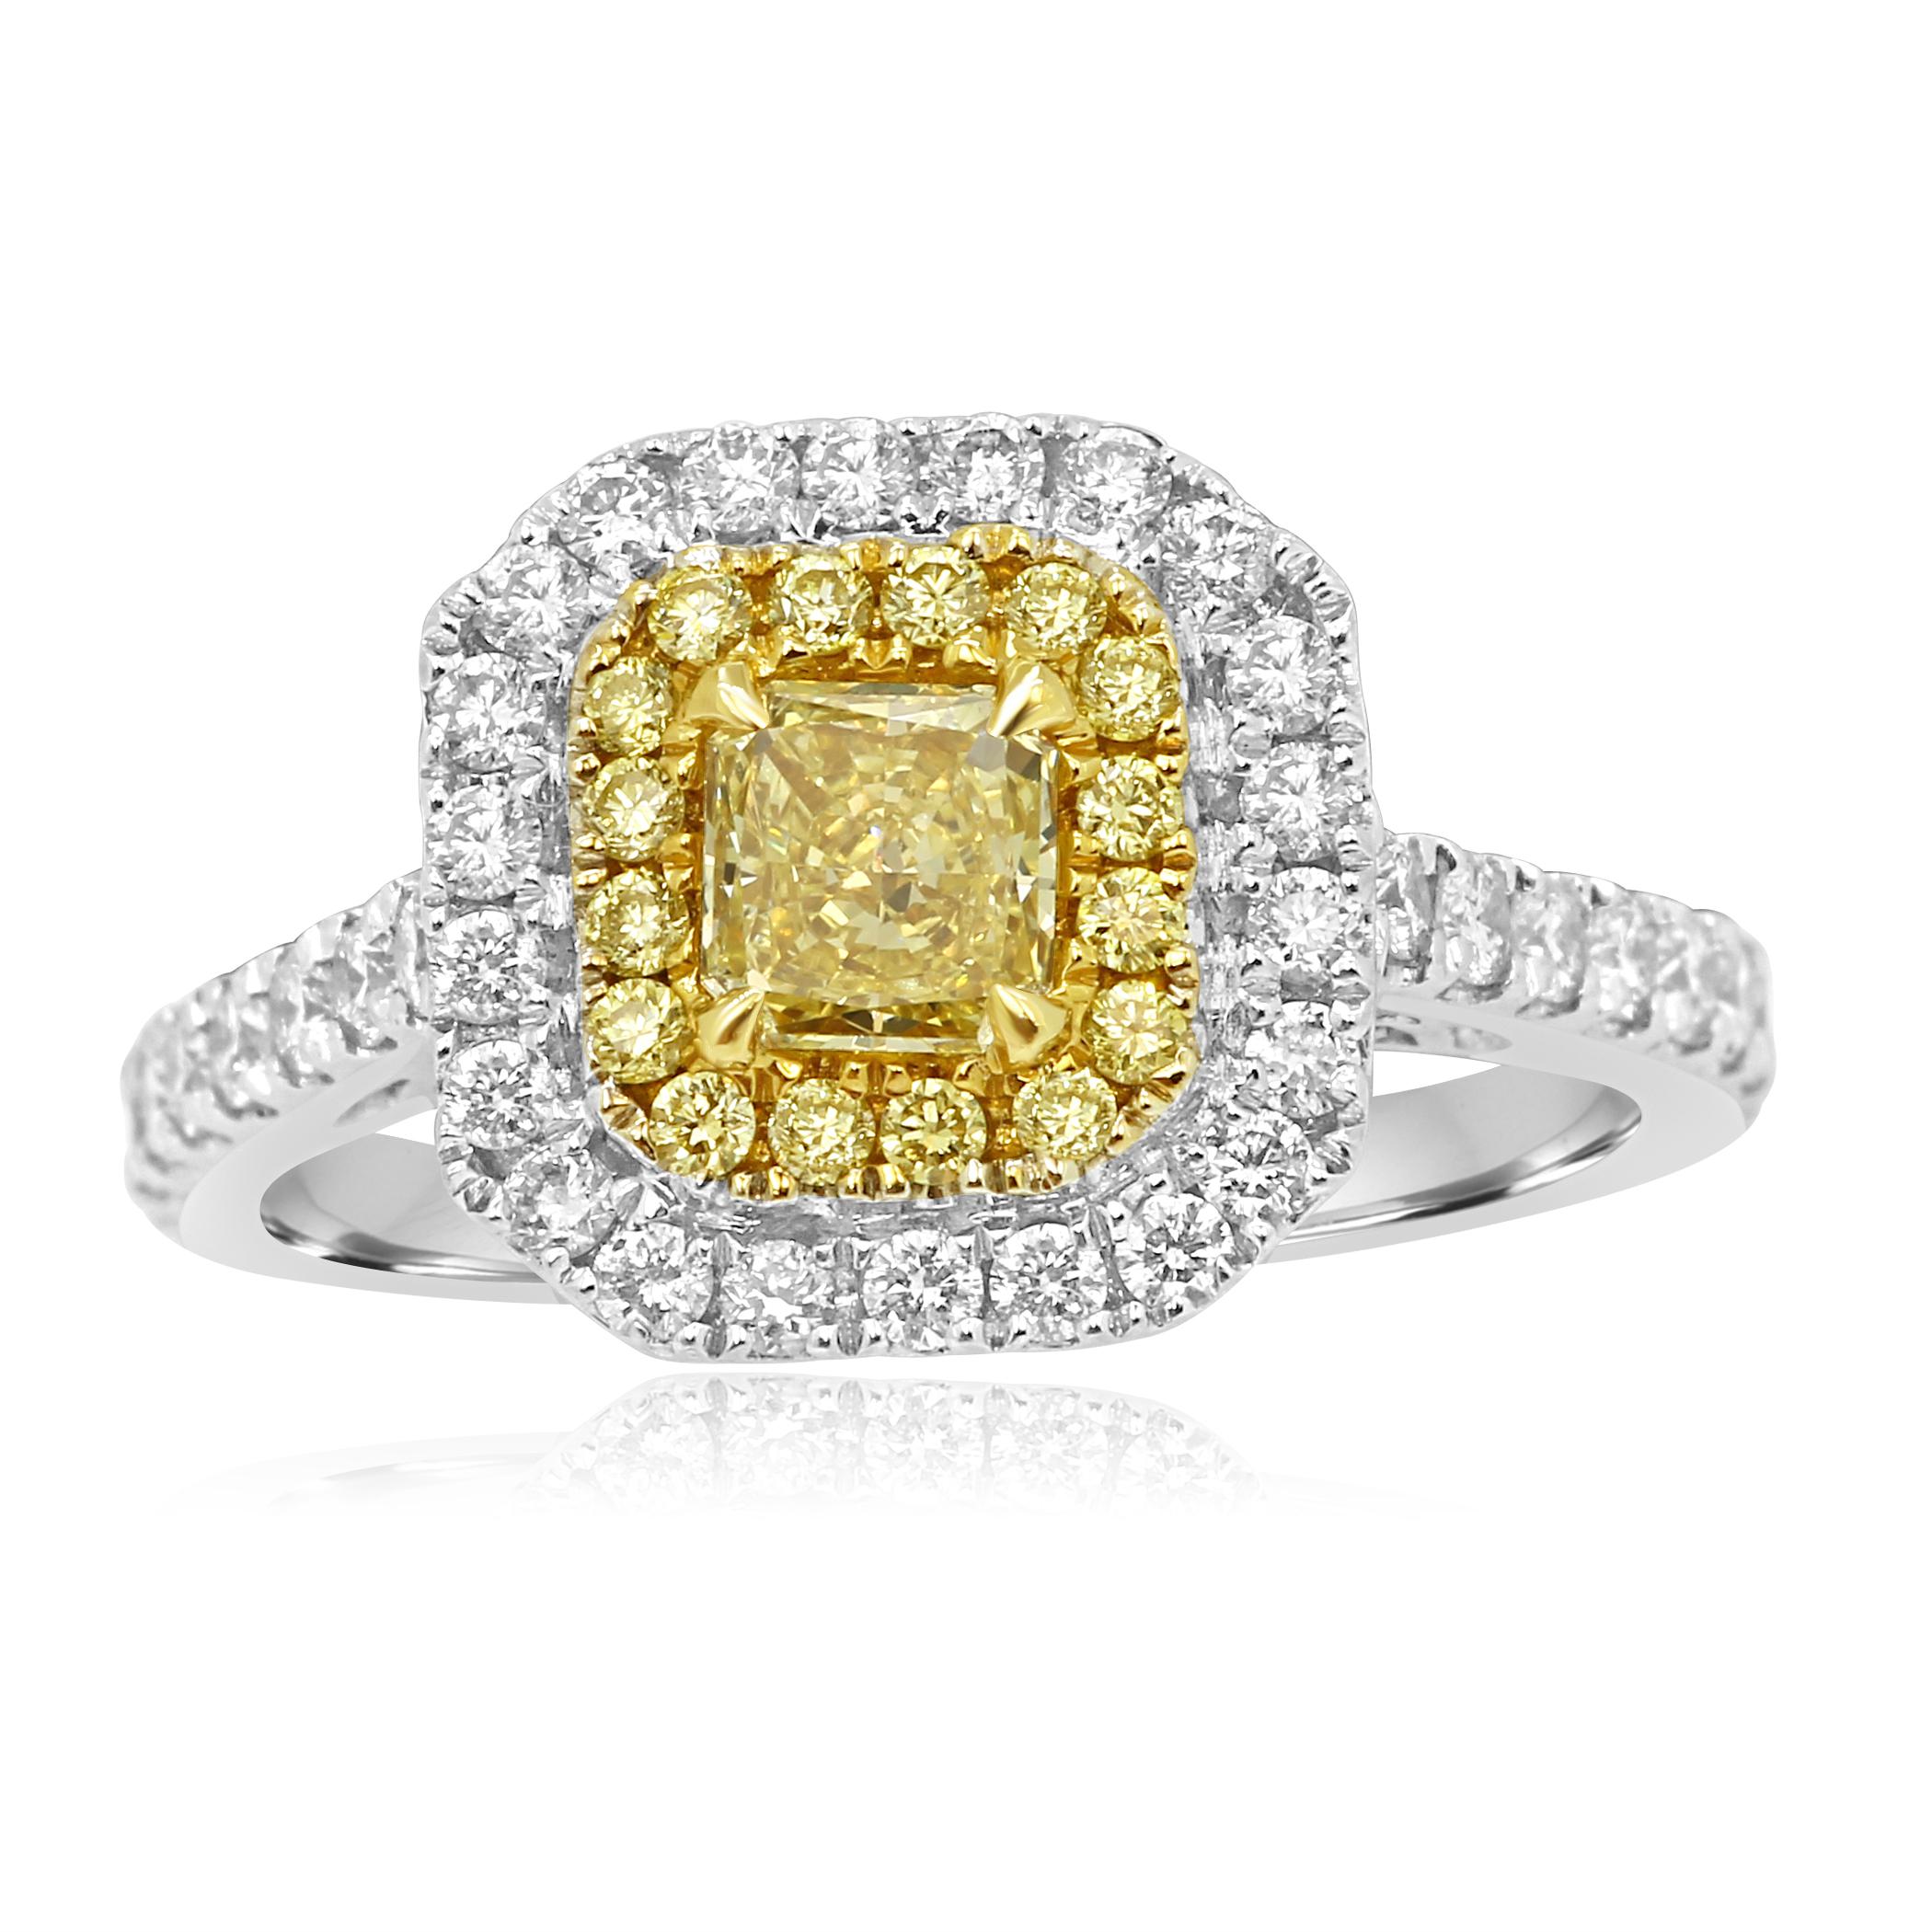 Gorgeous Natural Fancy Yellow Diamond Radiant Cut VS-SI Clarity 0.43 Carat Encircled in a Double Halo of Natural Fancy Yellow Round Brilliant Diamonds VS-SI Clarity 0.16 Carat and White Colorless Round Brilliant Diamonds VS-SI Clarity 0.63 Carat in